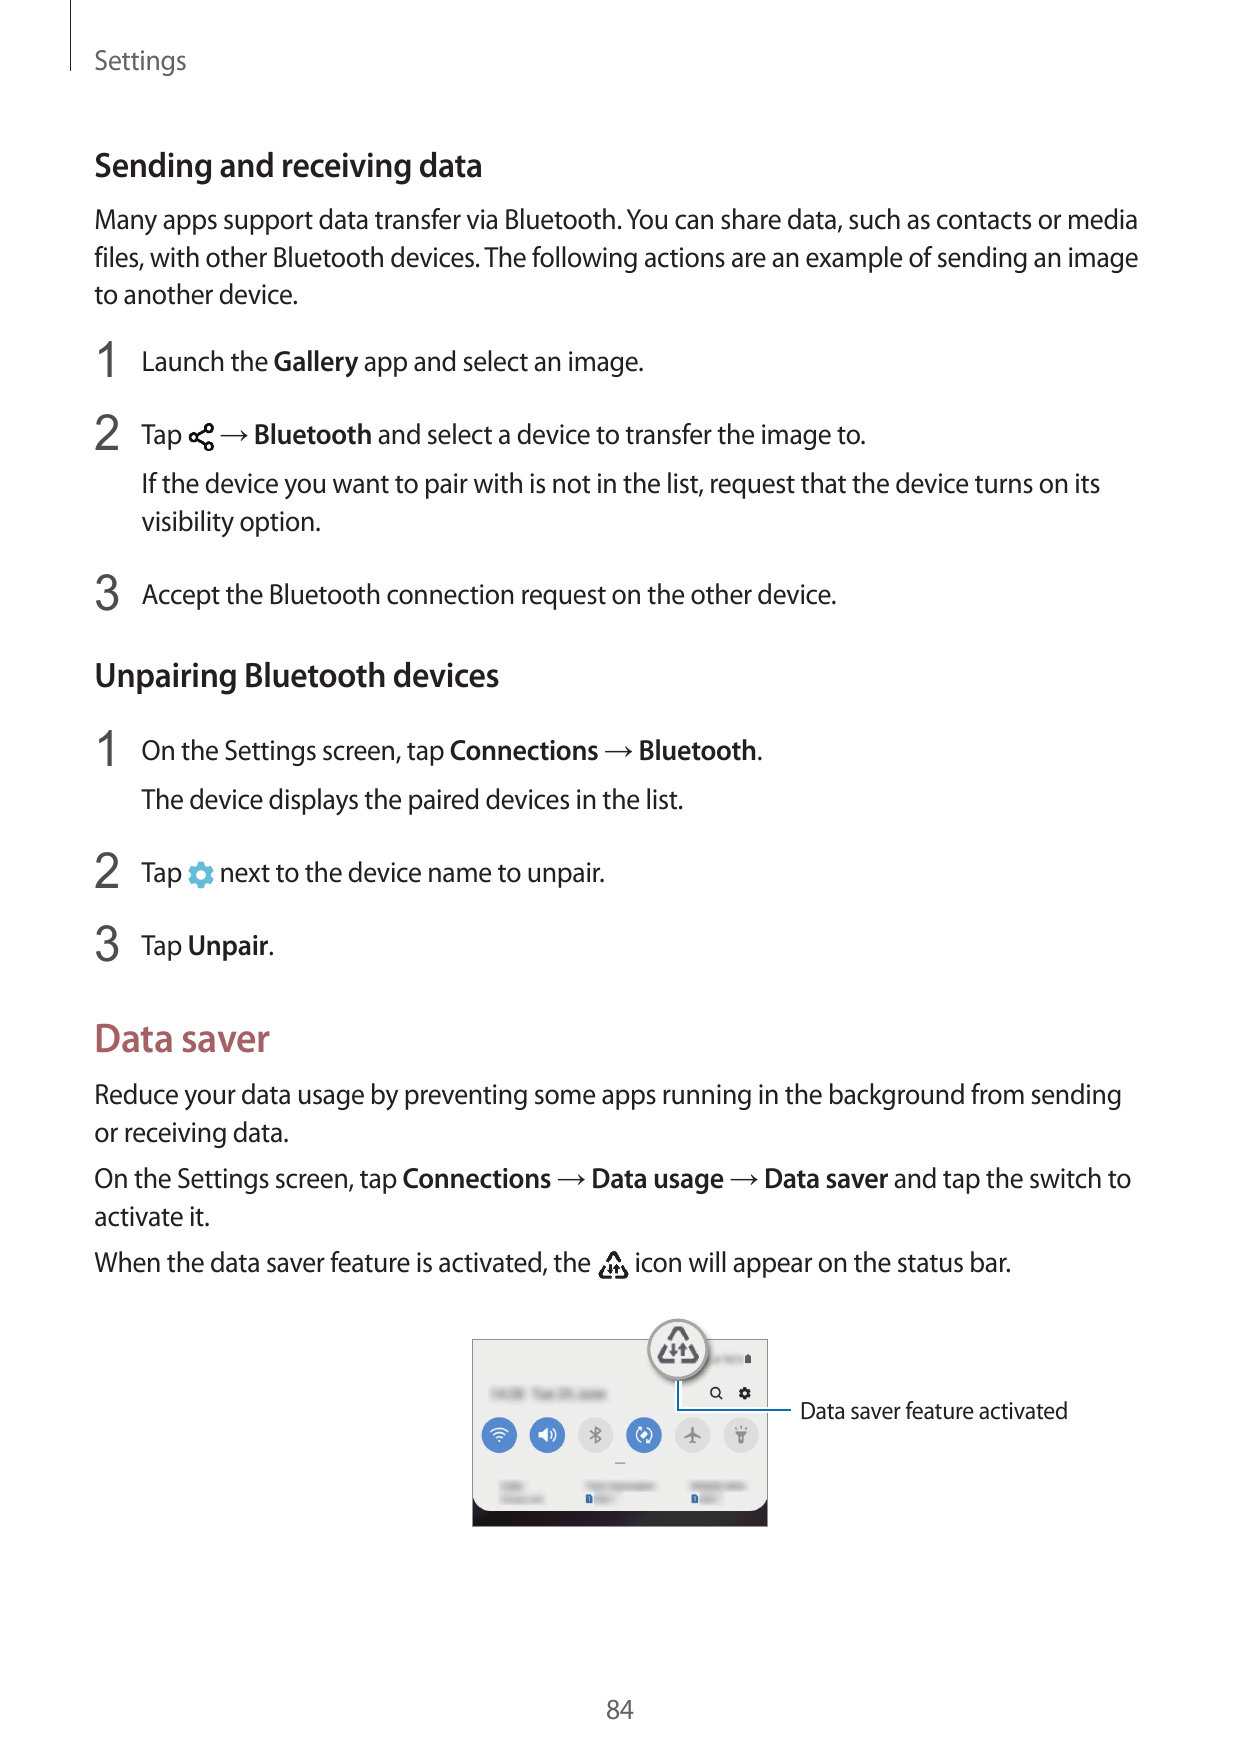 SettingsSending and receiving dataMany apps support data transfer via Bluetooth. You can share data, such as contacts or mediafi